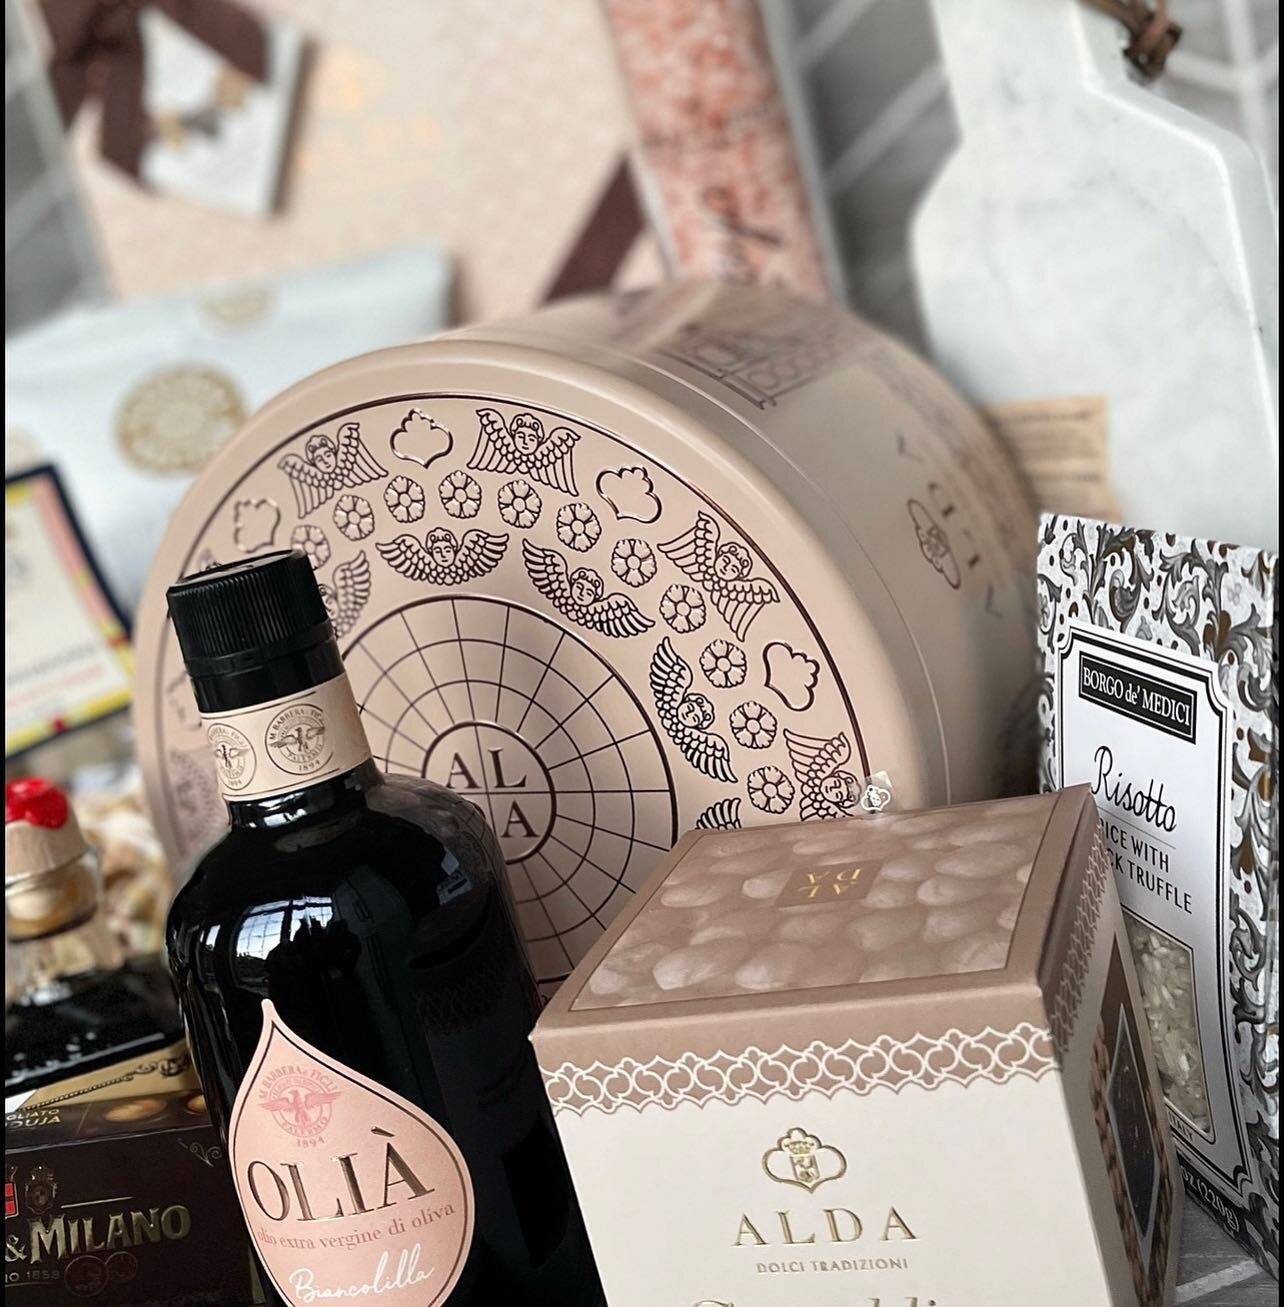 Bespoke Holiday Gift Baskets🎁
#italian #imported #vosgeschocolate
#tradizione #panettone #borgodemedici
.

.

Book Your Cozy Christmas Party with Quanto Basta. 

Inquire about our prix fixe menu or Buy out options email orders@quantobasta.ca
.
.
.
.